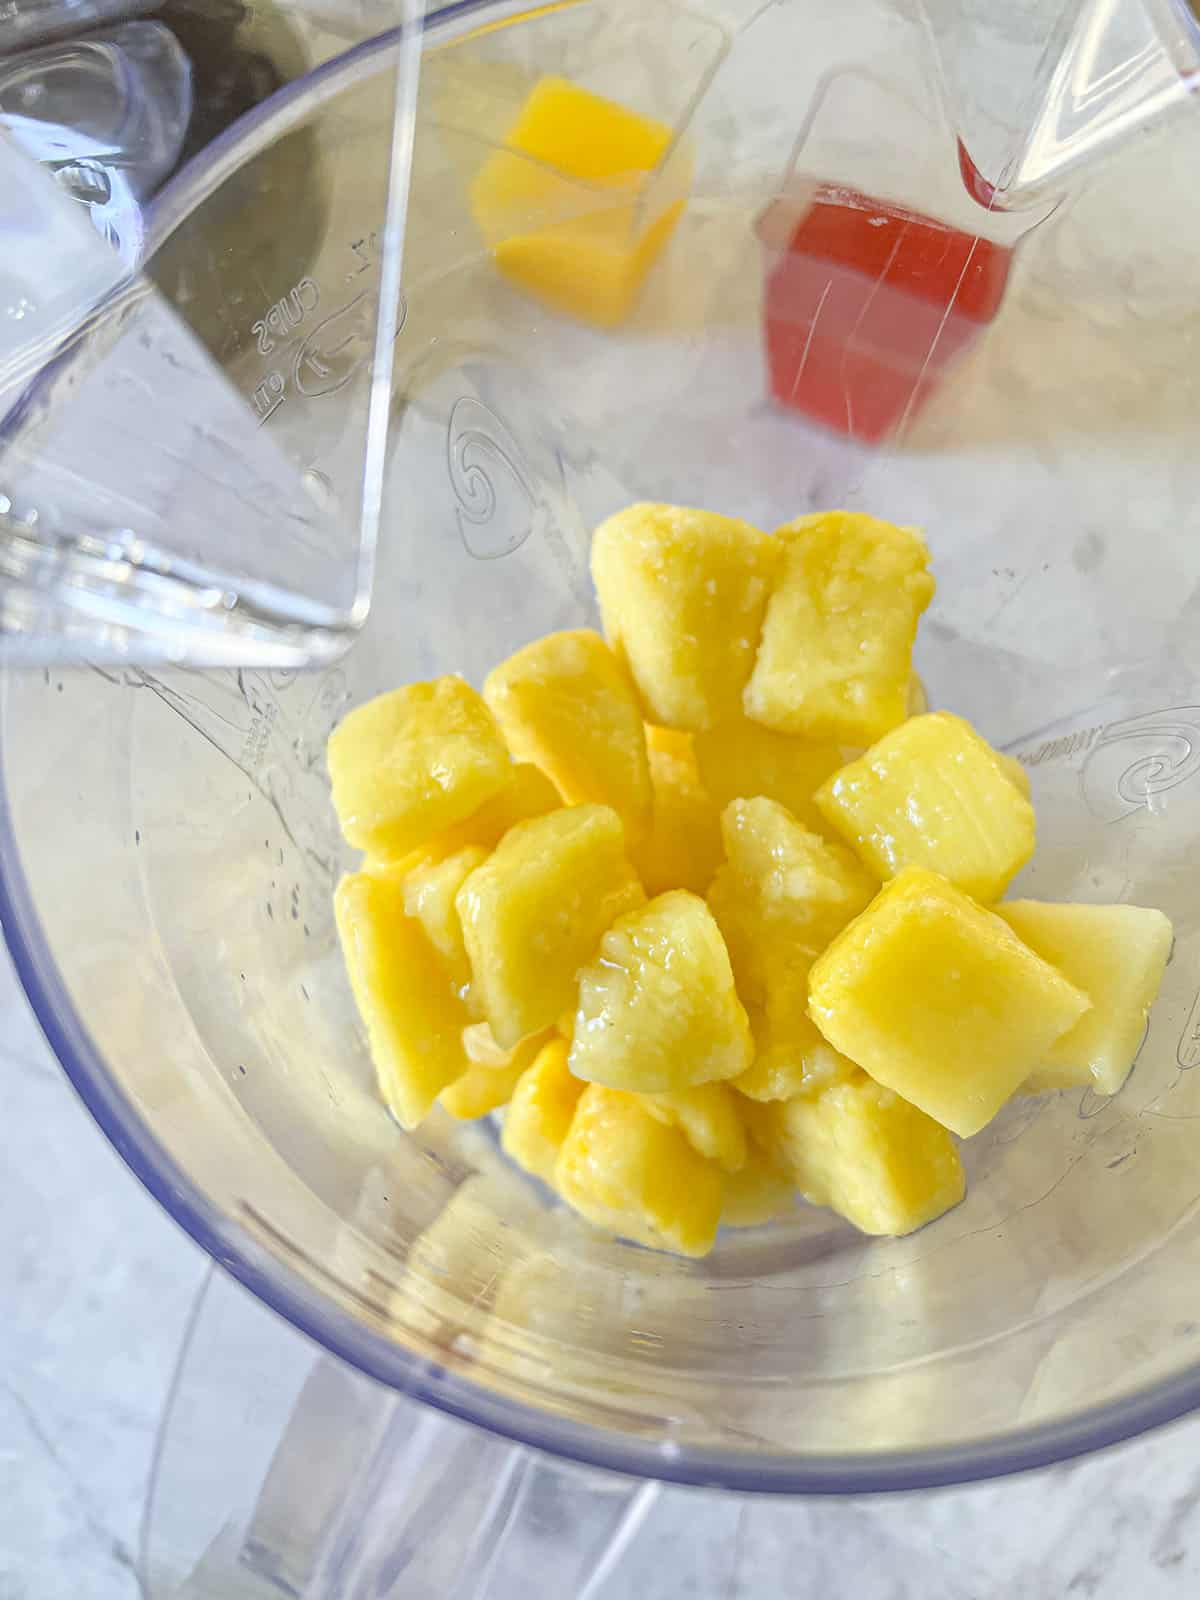 Pieces of frozen pineapple in the bottom of the blender with vodka mixed in.